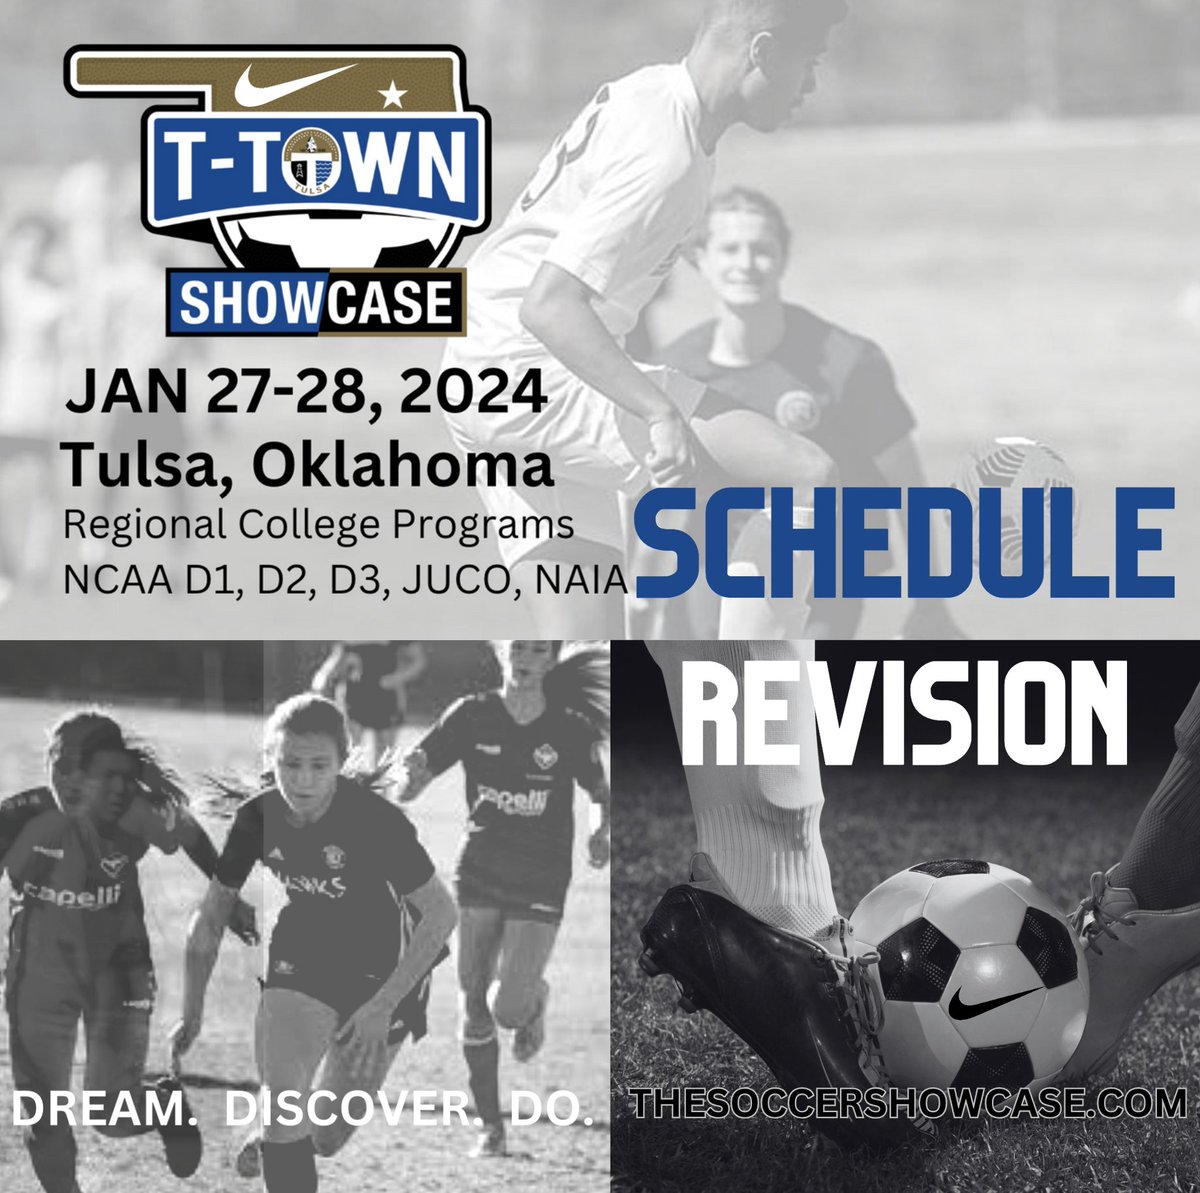 ATTENTION: T TOWN SHOWCASE schedules revised. Please be sure to double check schedules. ALL GAMES are STILL ON at Case Community RiverCity Parks. T TOWN SHOWCASE HOMEPAGE: thesoccershowcase.com/tournaments/t-… thesoccershowcase.com #ttownshowcase